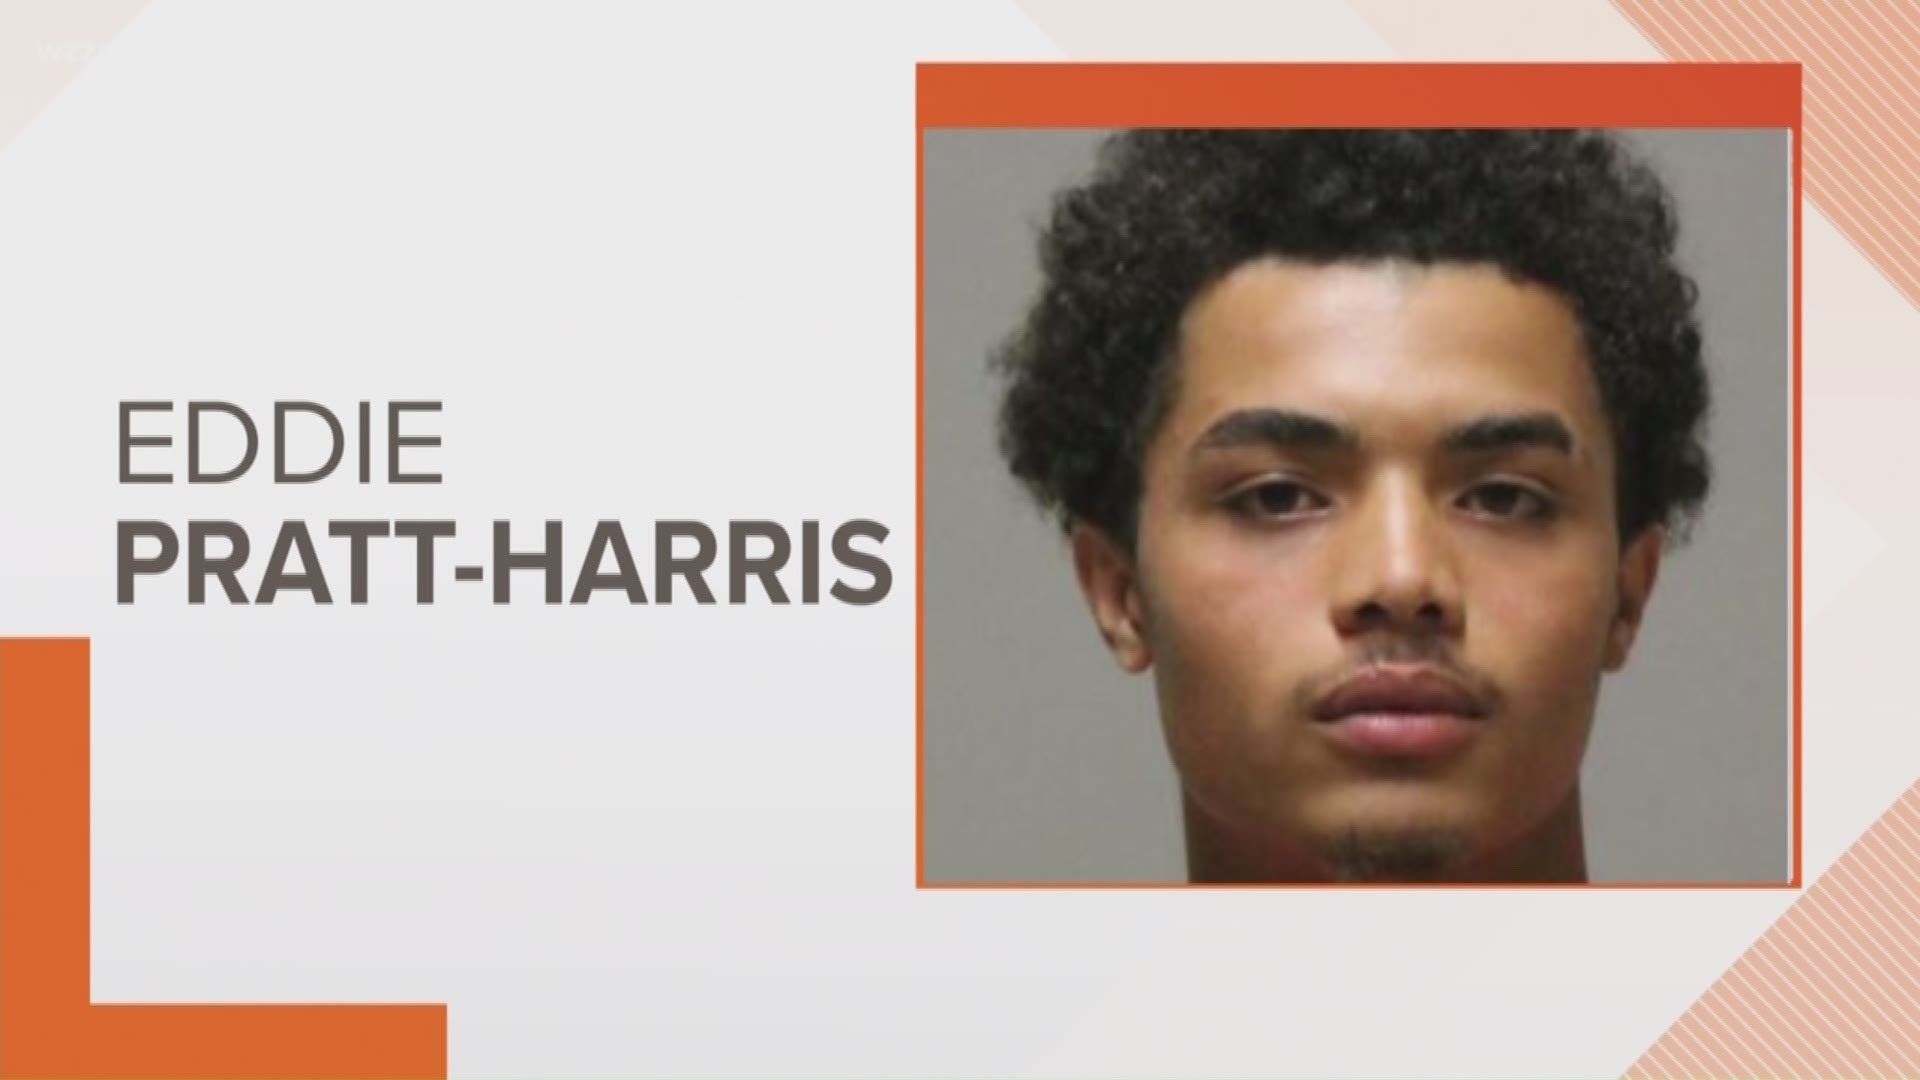 Man arrested in connection with drive-by shooting